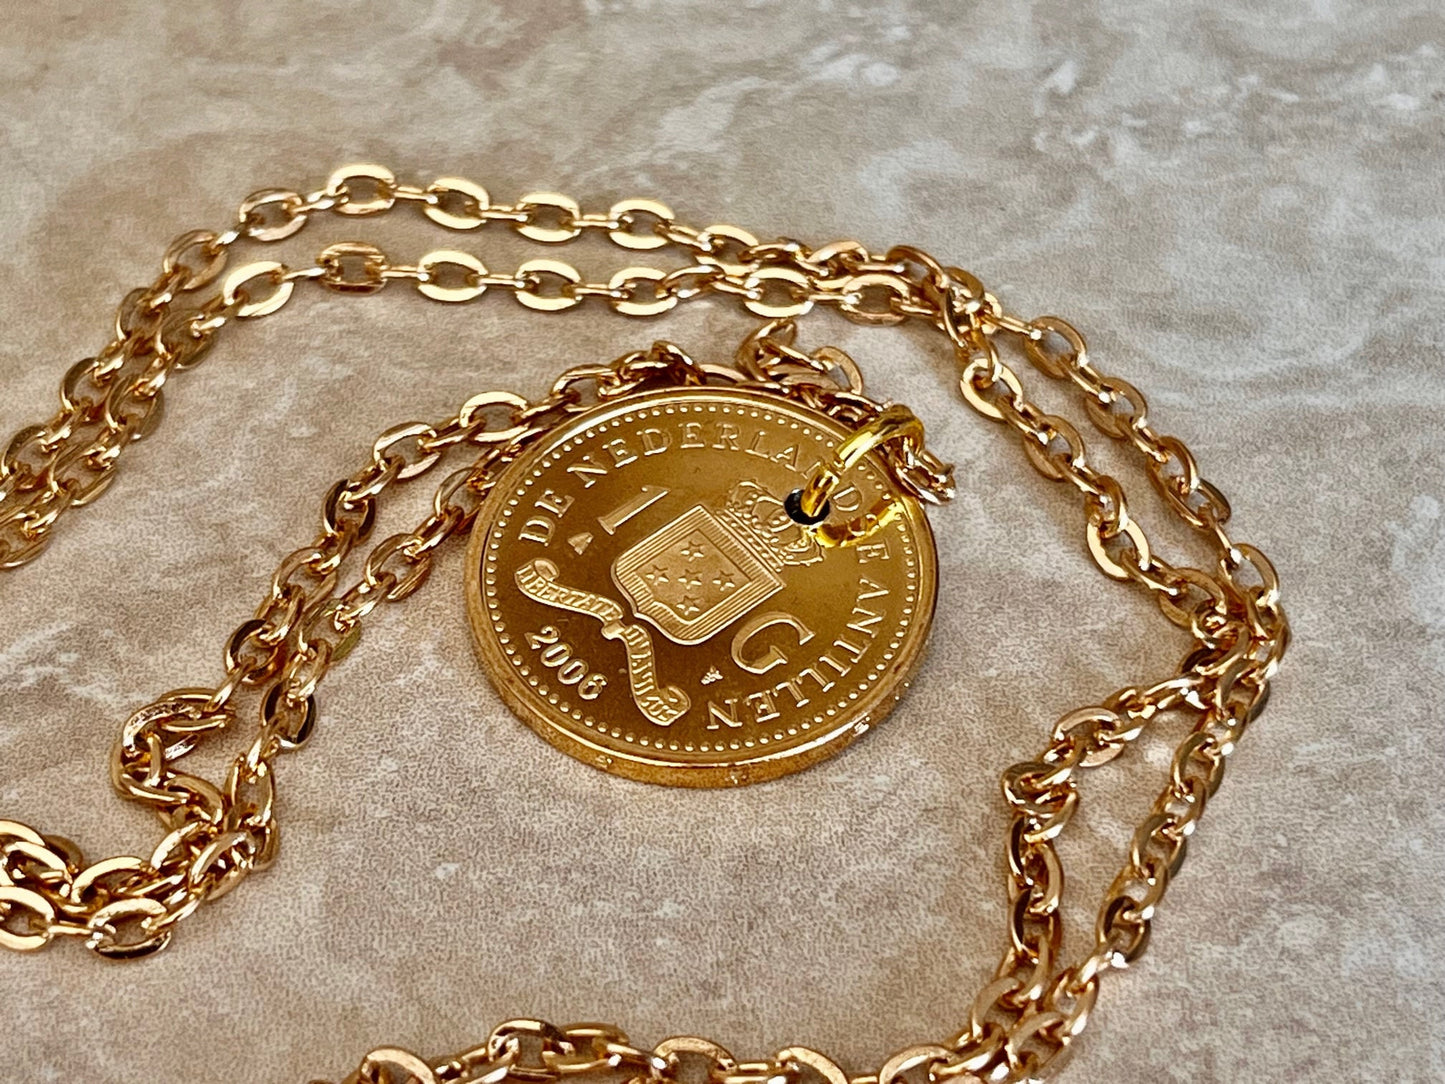 Netherland Coin Pendant Antilles Gulden Queen Juliana Necklace Jewelry Gift For Friend Coin Charm Gift For Him, Her, World Coins Collector